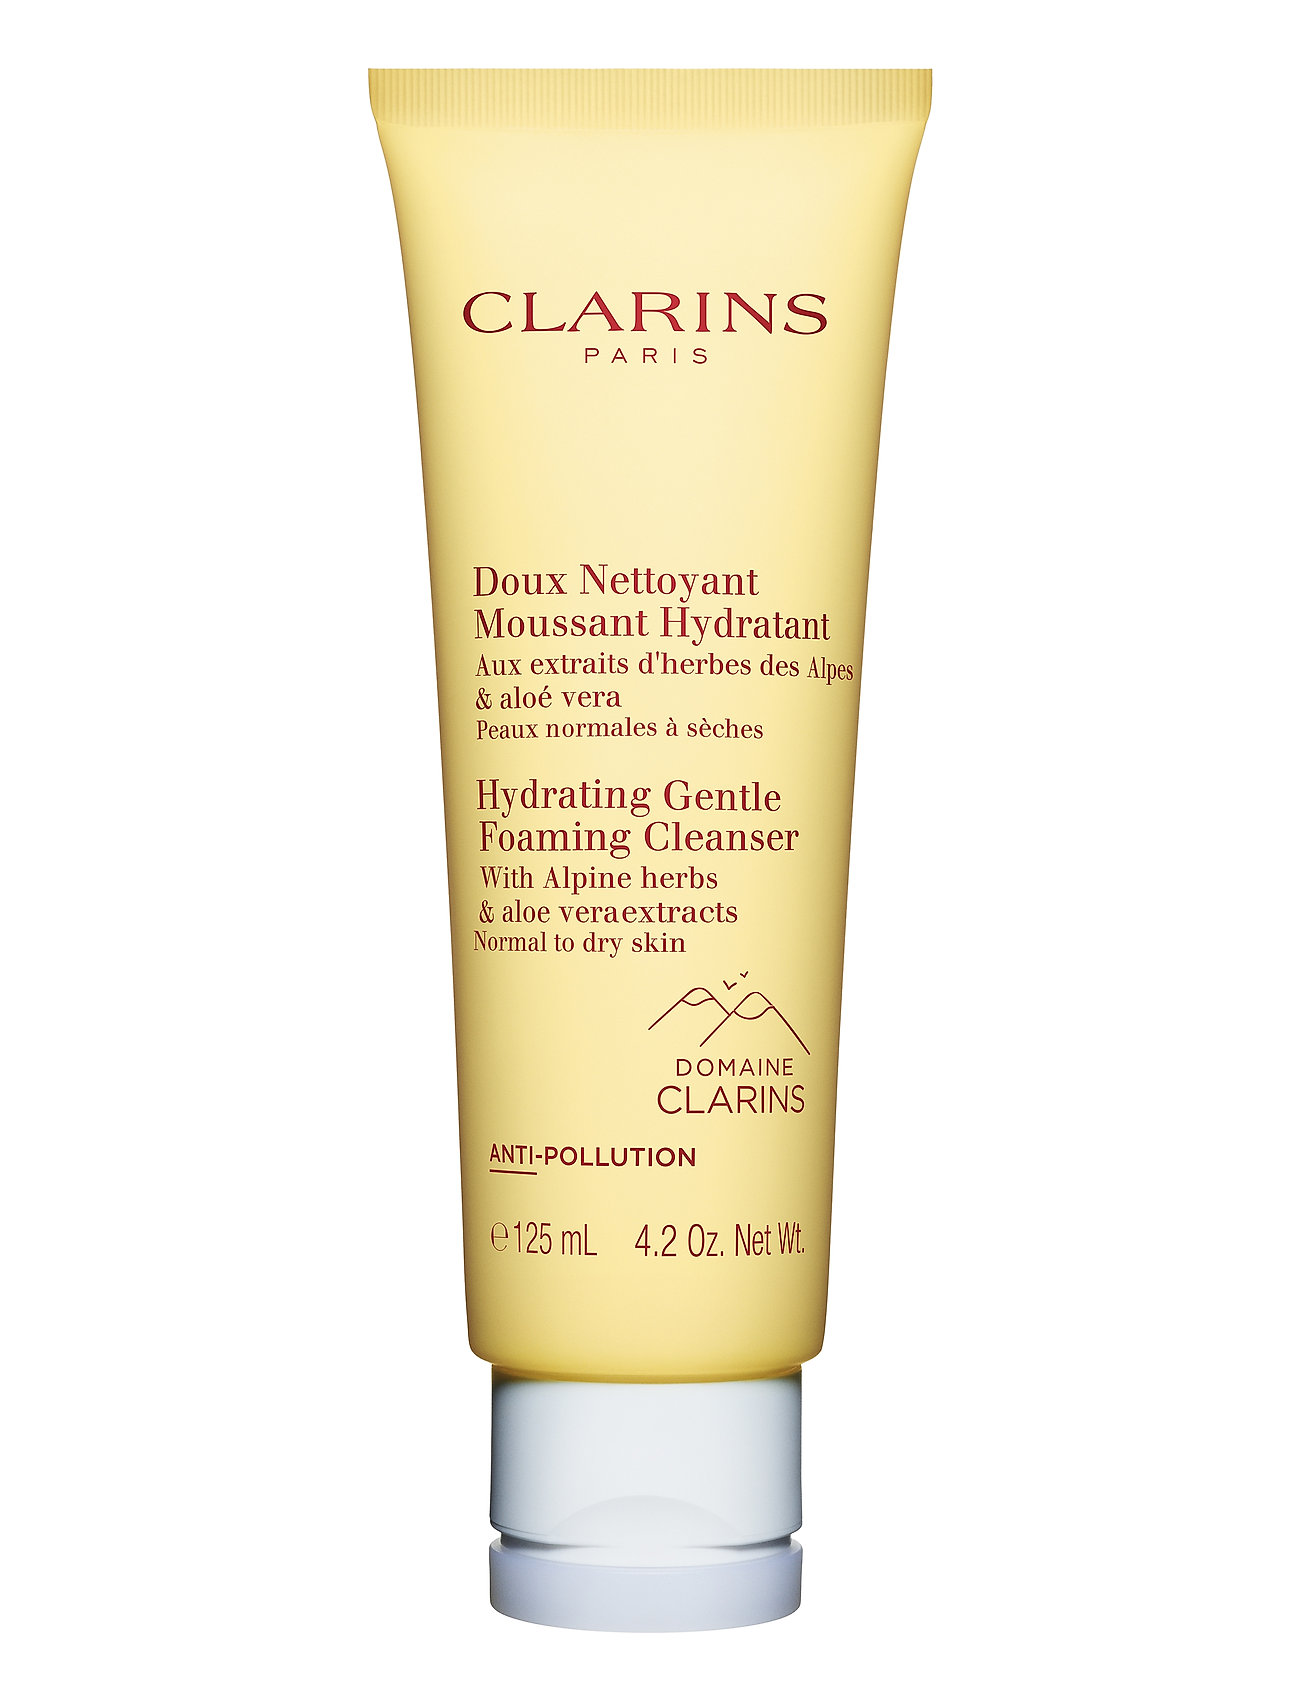 Hydrating Gentle Foaming Cleanser Beauty Women Skin Care Face Cleansers Milk Cleanser Nude Clarins